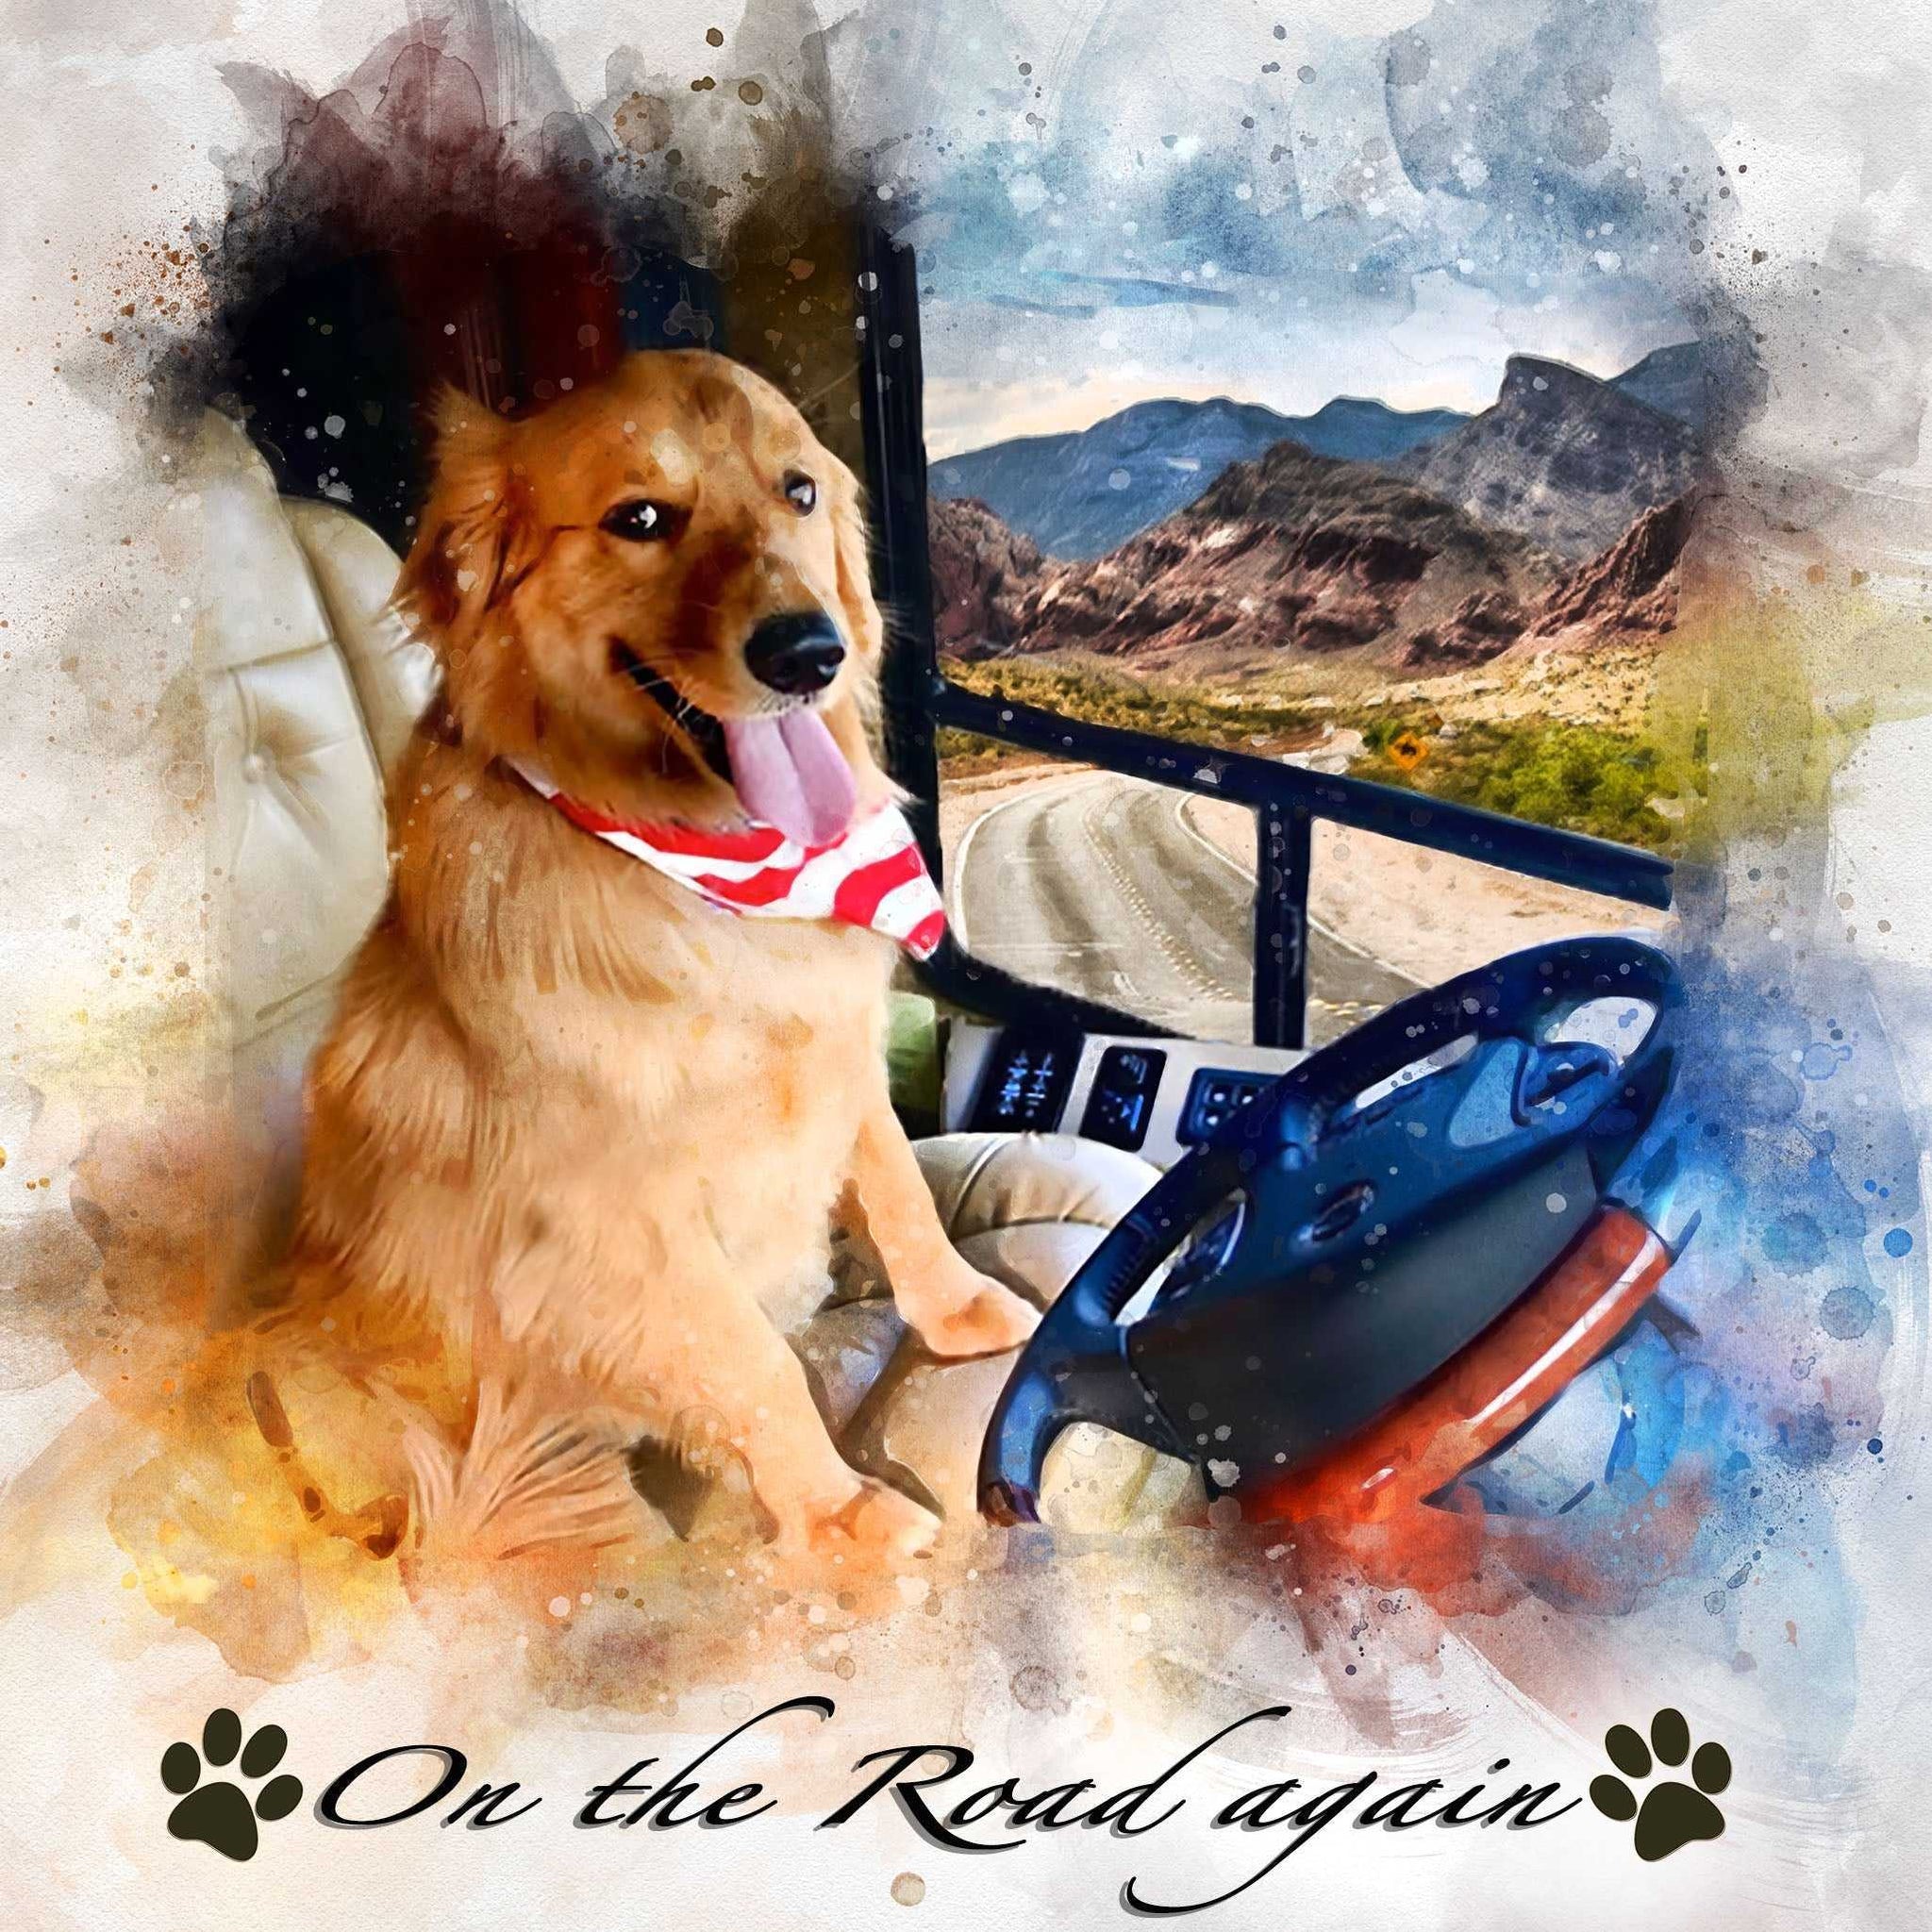 Camper Decor | Custom Portrait for Camping Lovers - FromPicToArt